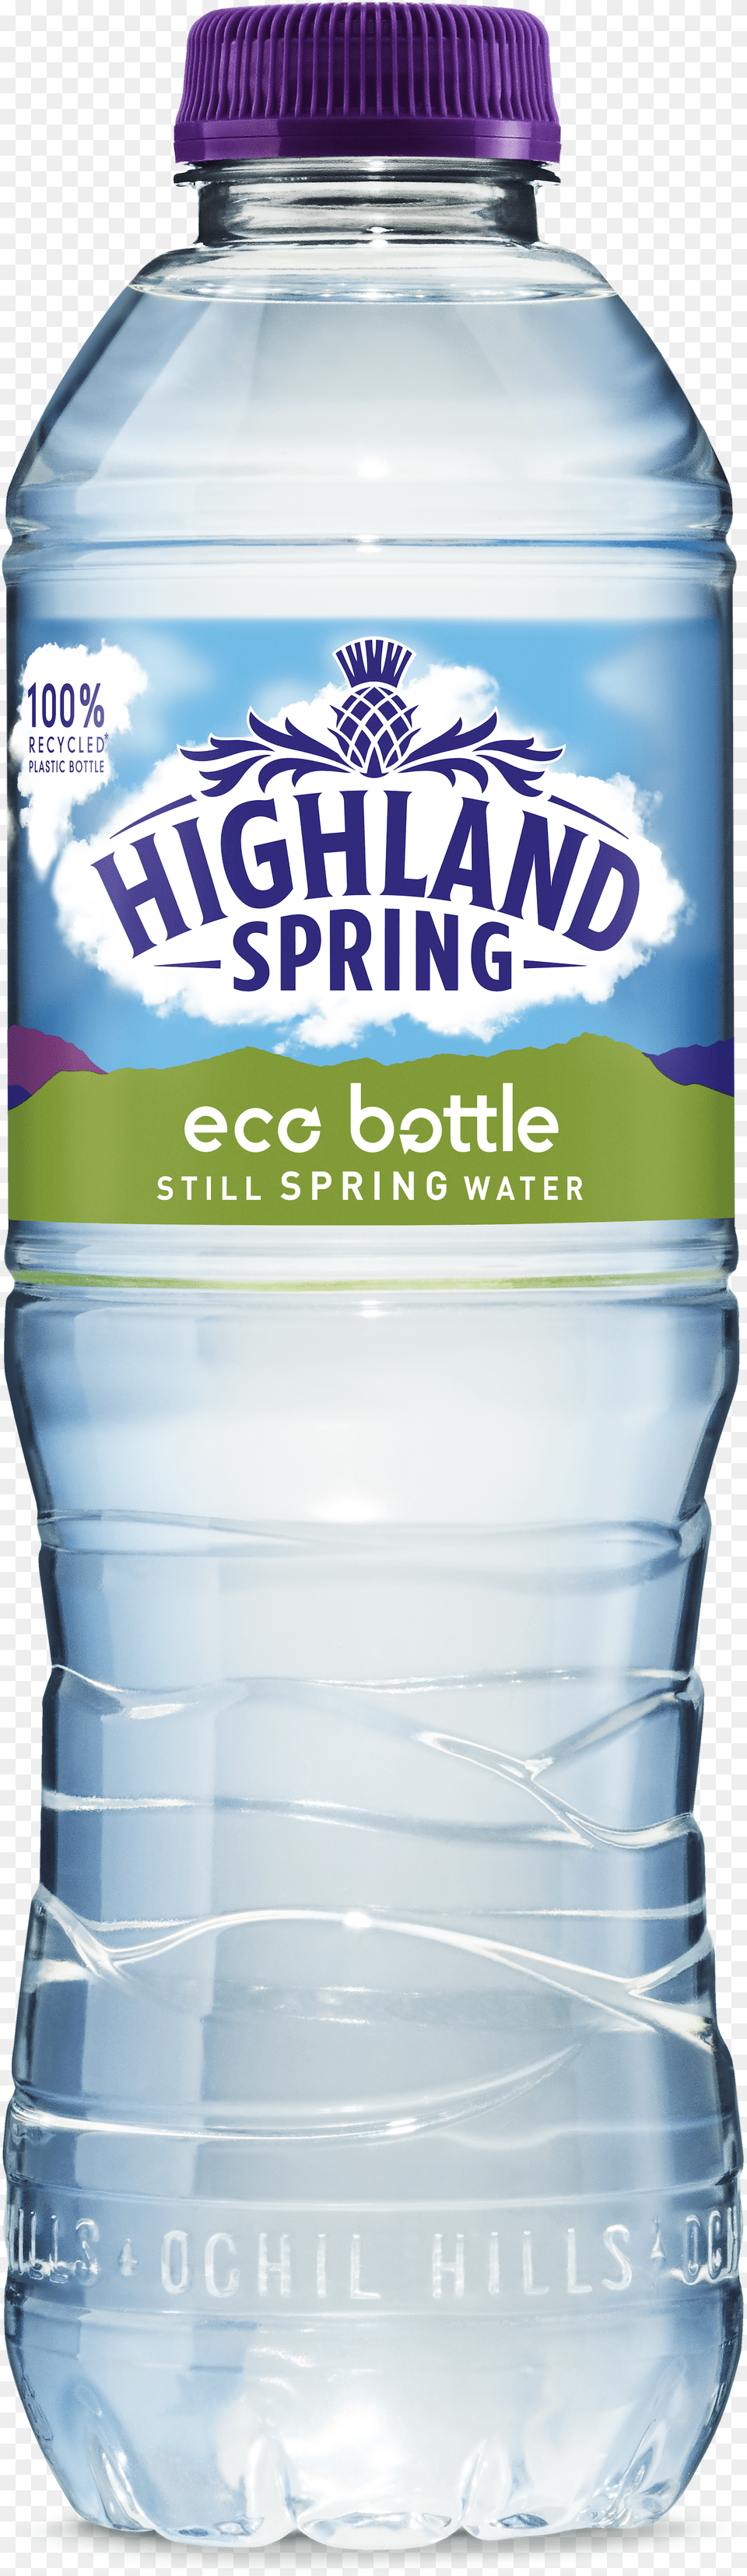 Highland Spring Eco Bottle In Layers Resized, Art, Graphics, Purple, Light Free Png Download